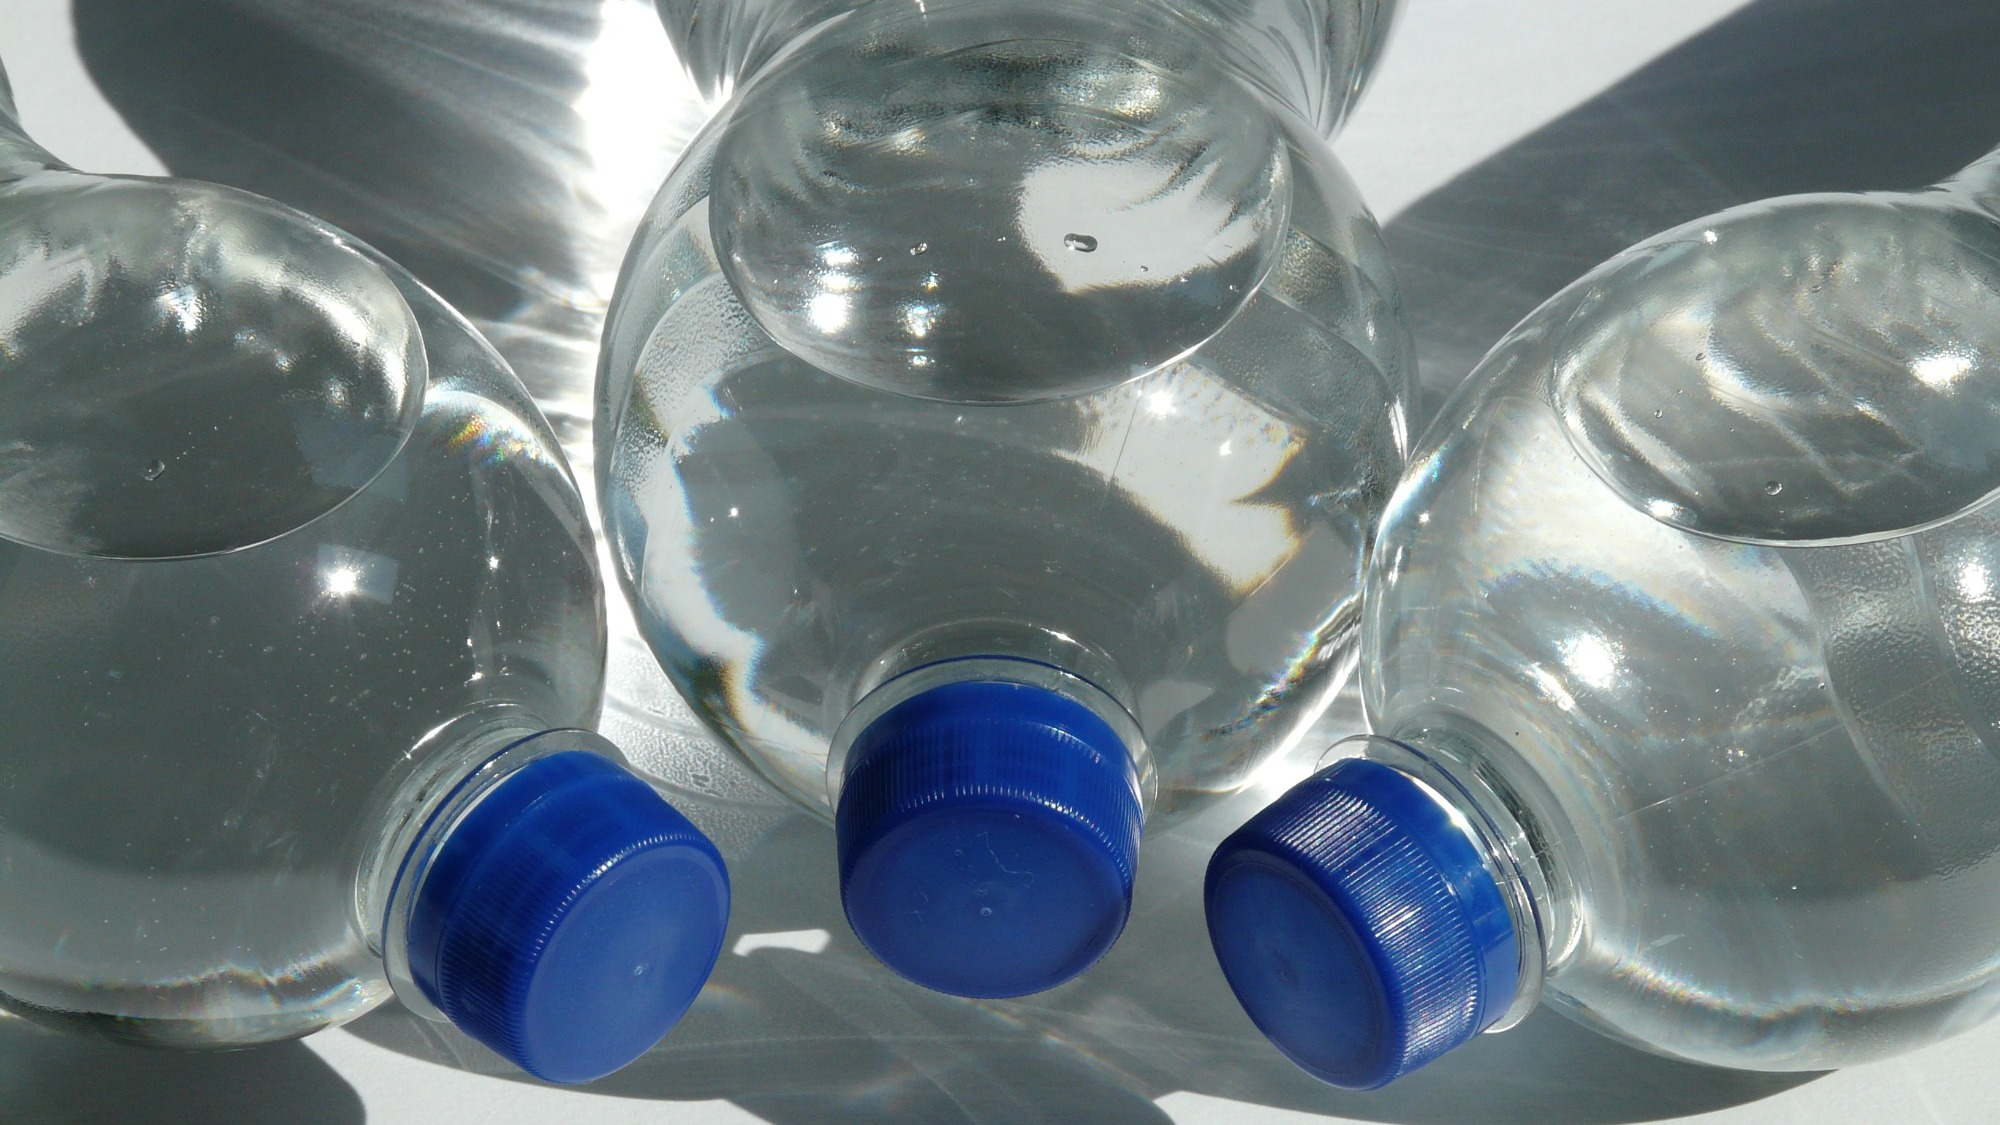 The plastic water bottle industry is booming. Here's why that's a